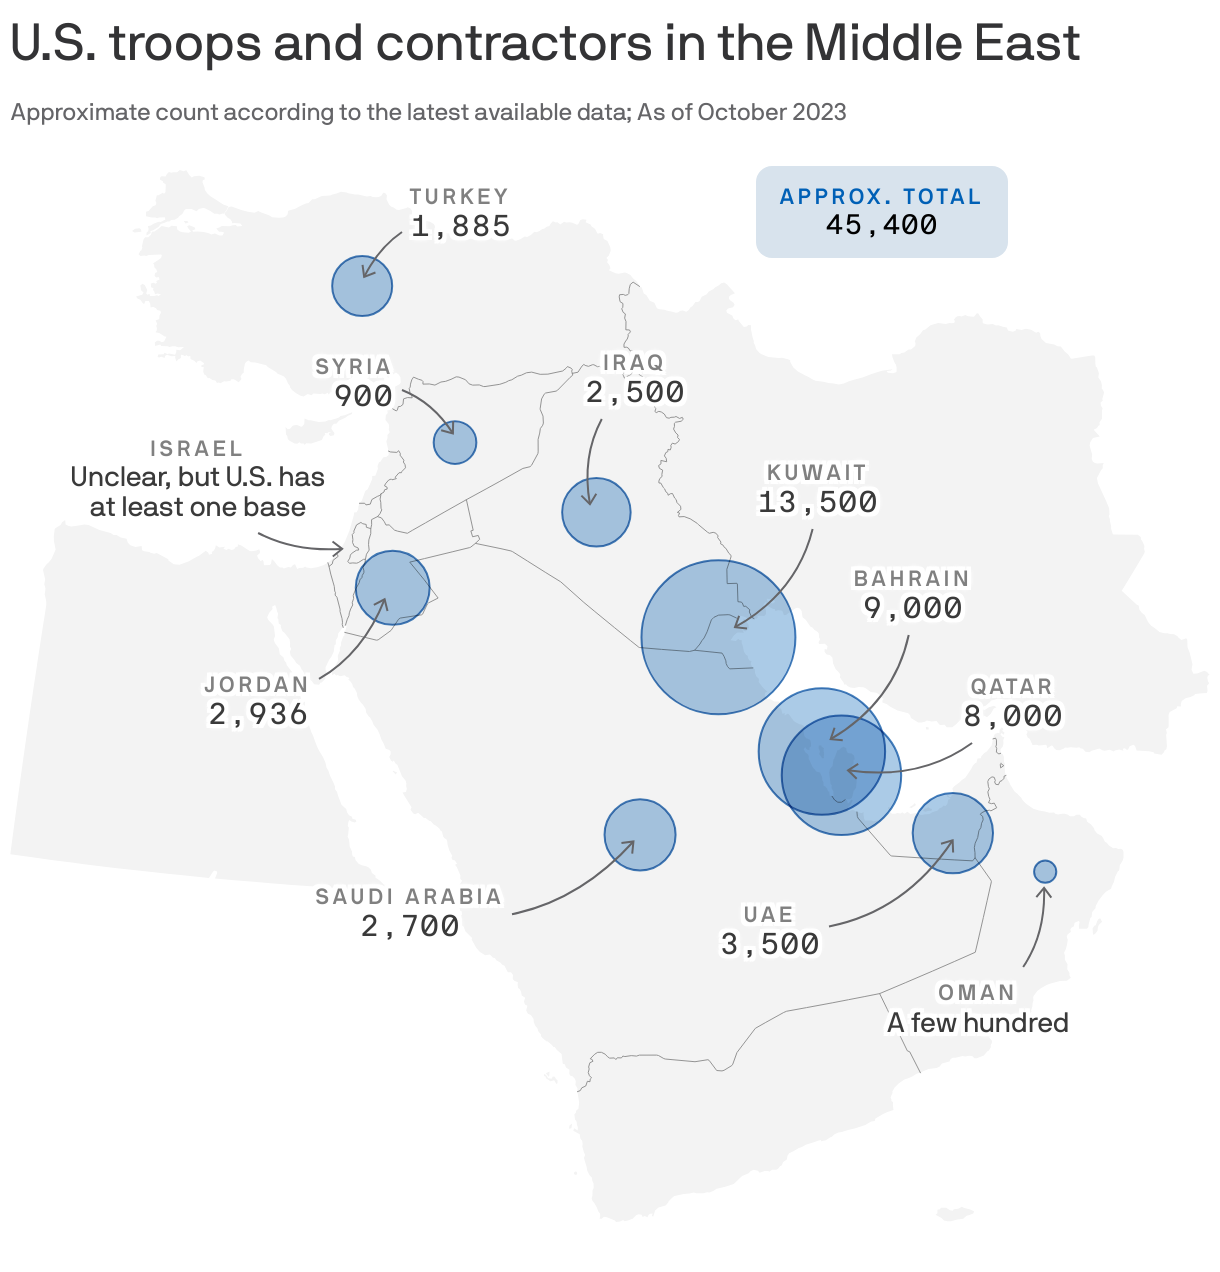 U.S. troops and contractors in the Middle East